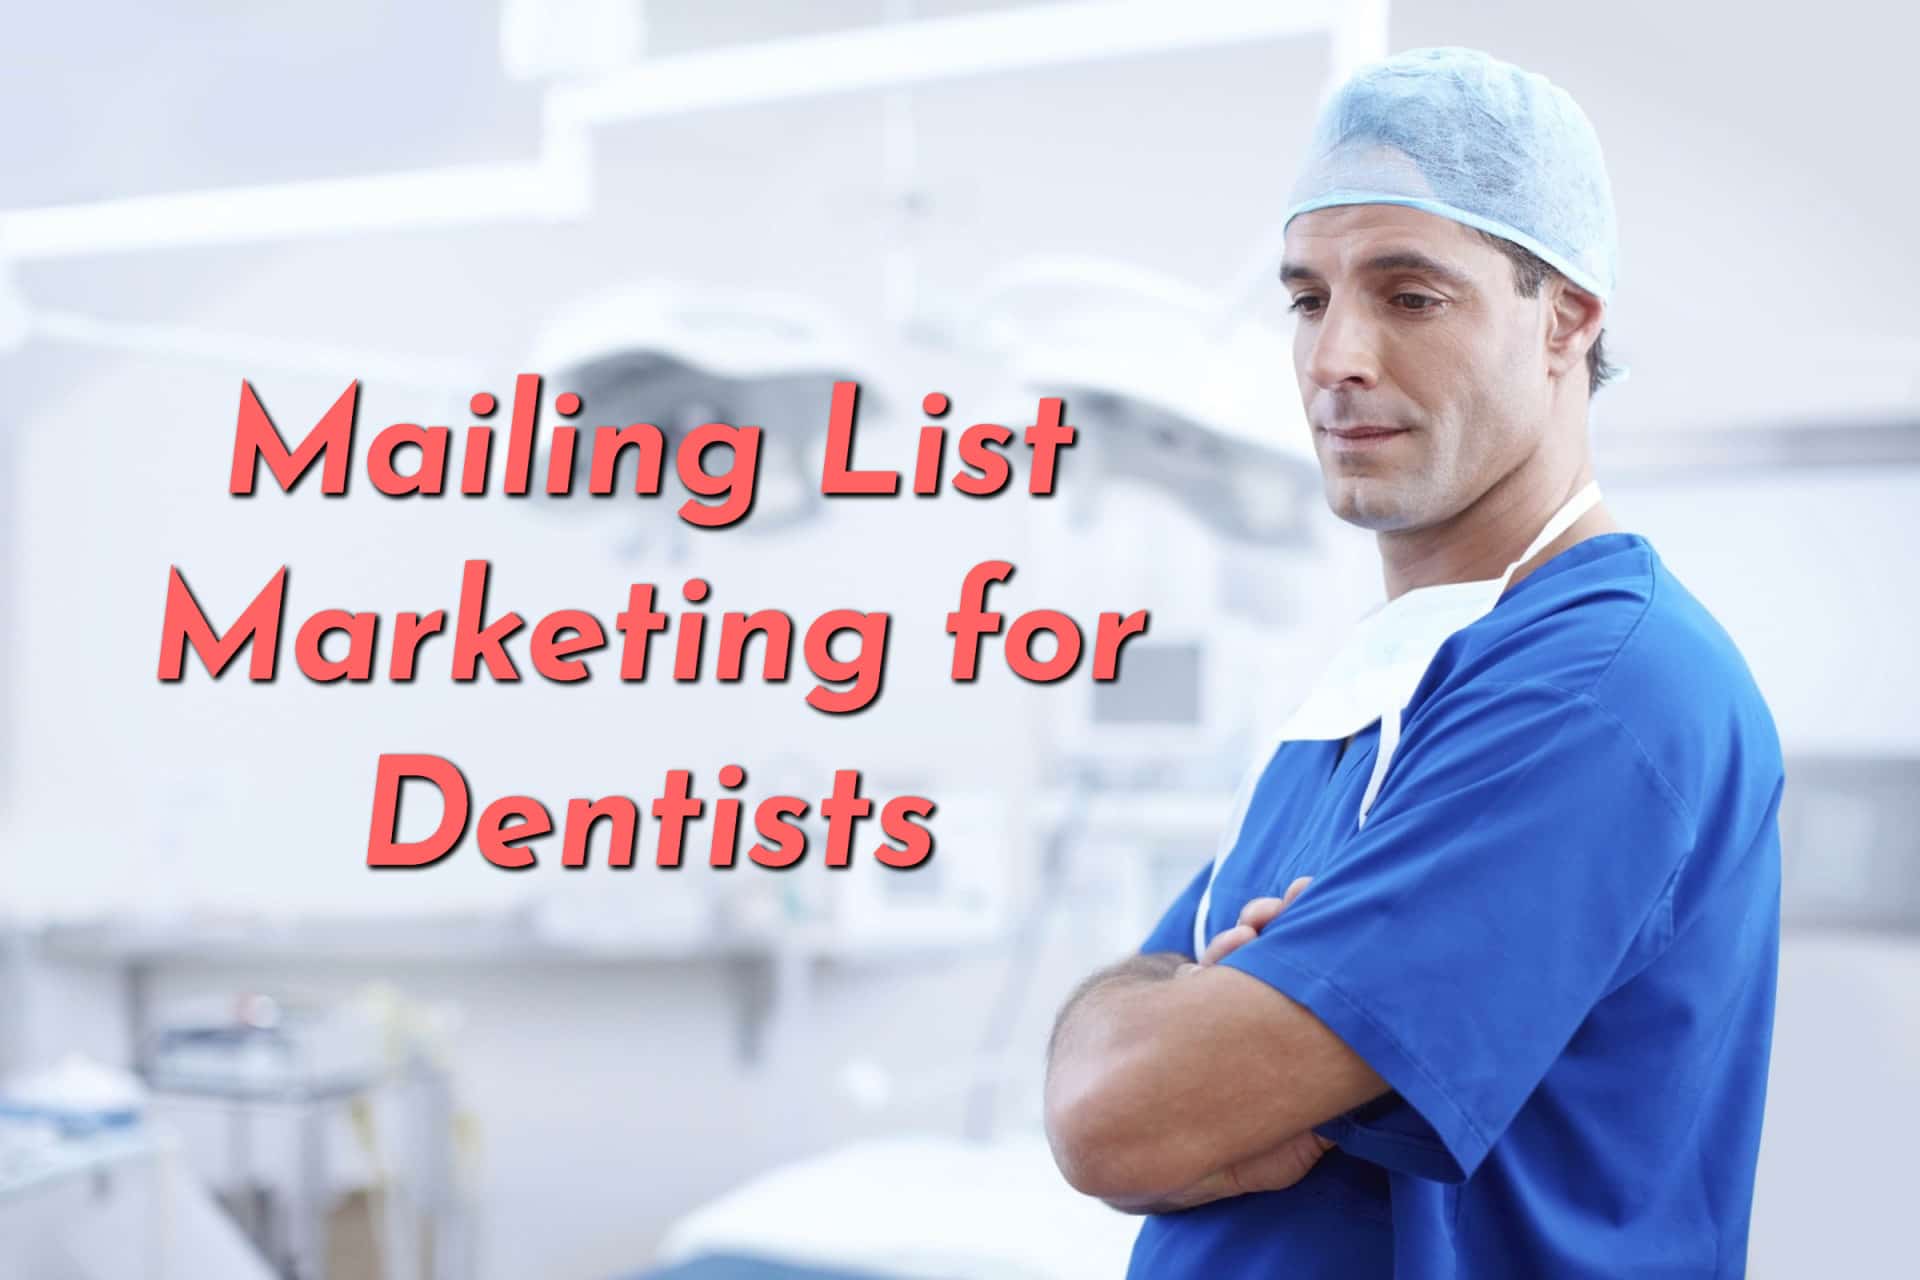 A dentist contemplating the usefulness of mailing list marketing for dentists